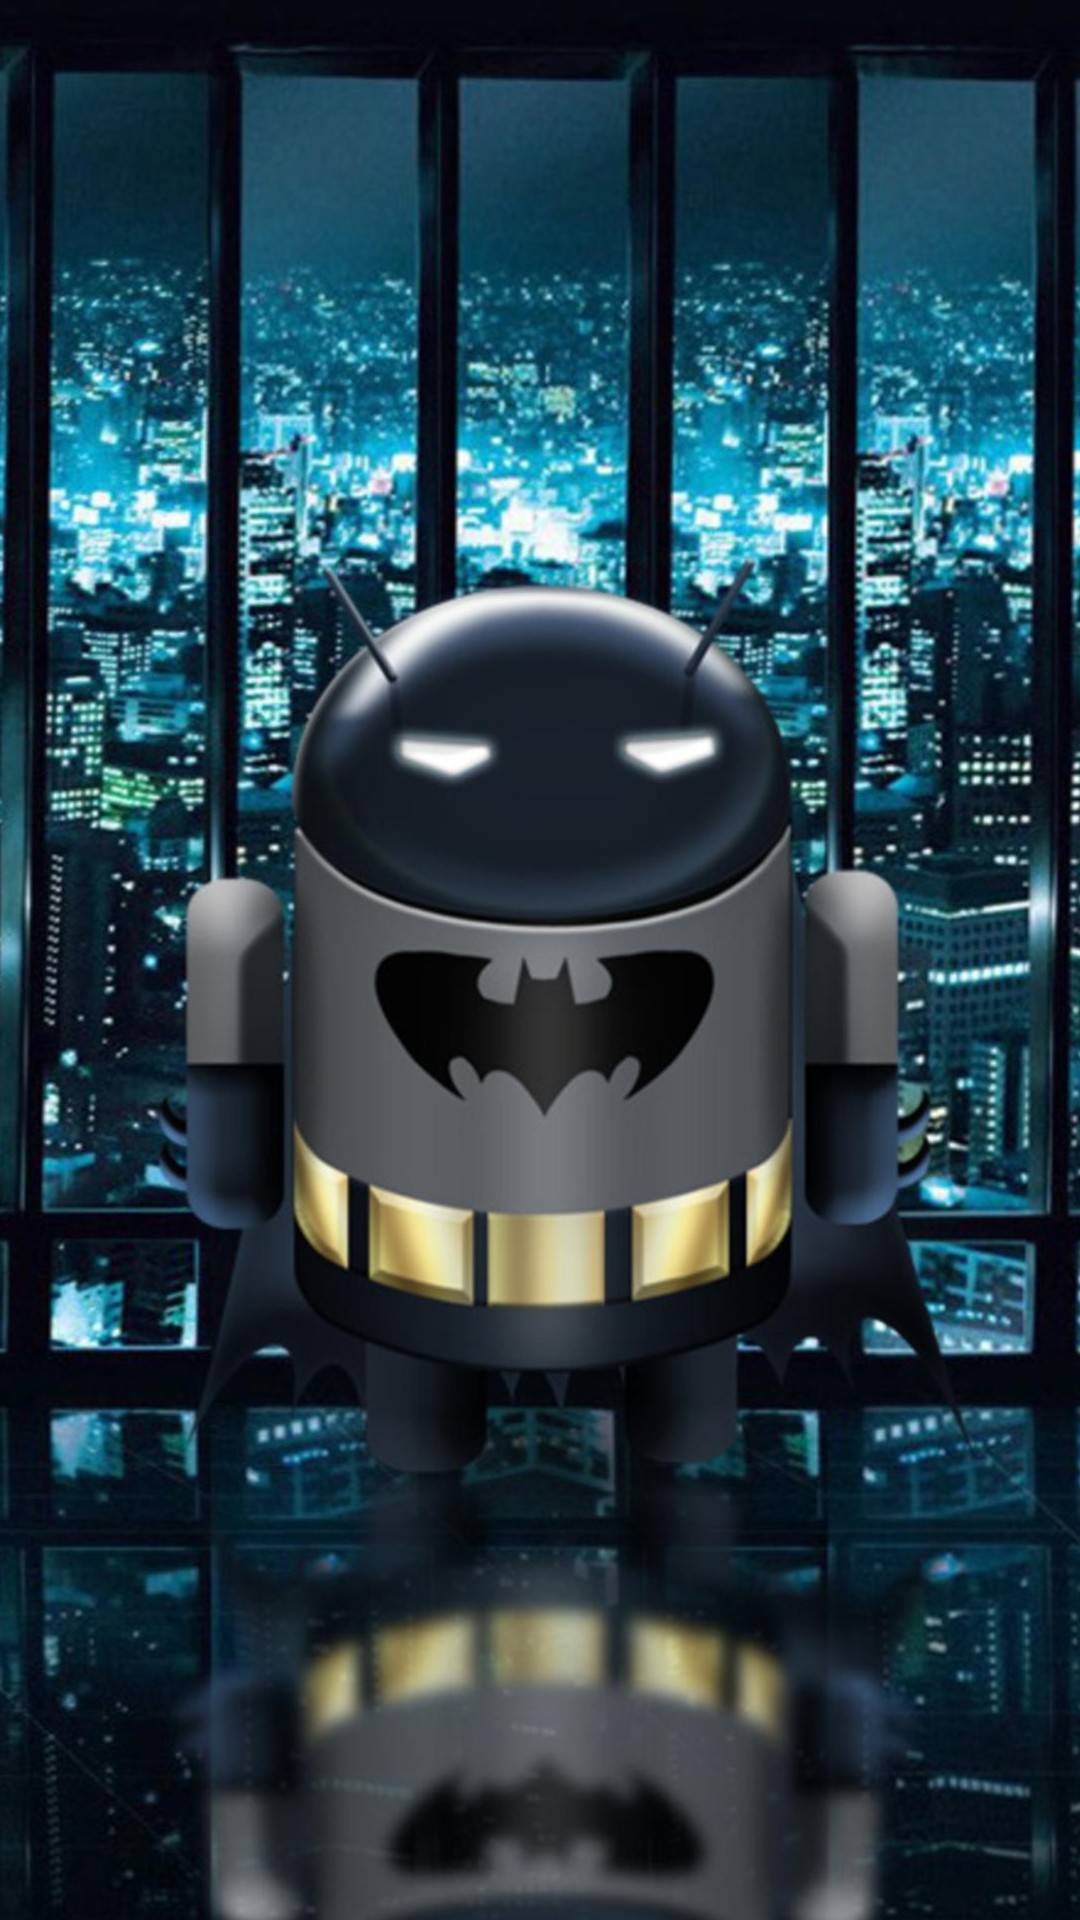 Android Batandroid Smartphone Wallpapers Hd - Hd Wallpapers 1080p Android -  1080x1920 Wallpaper 